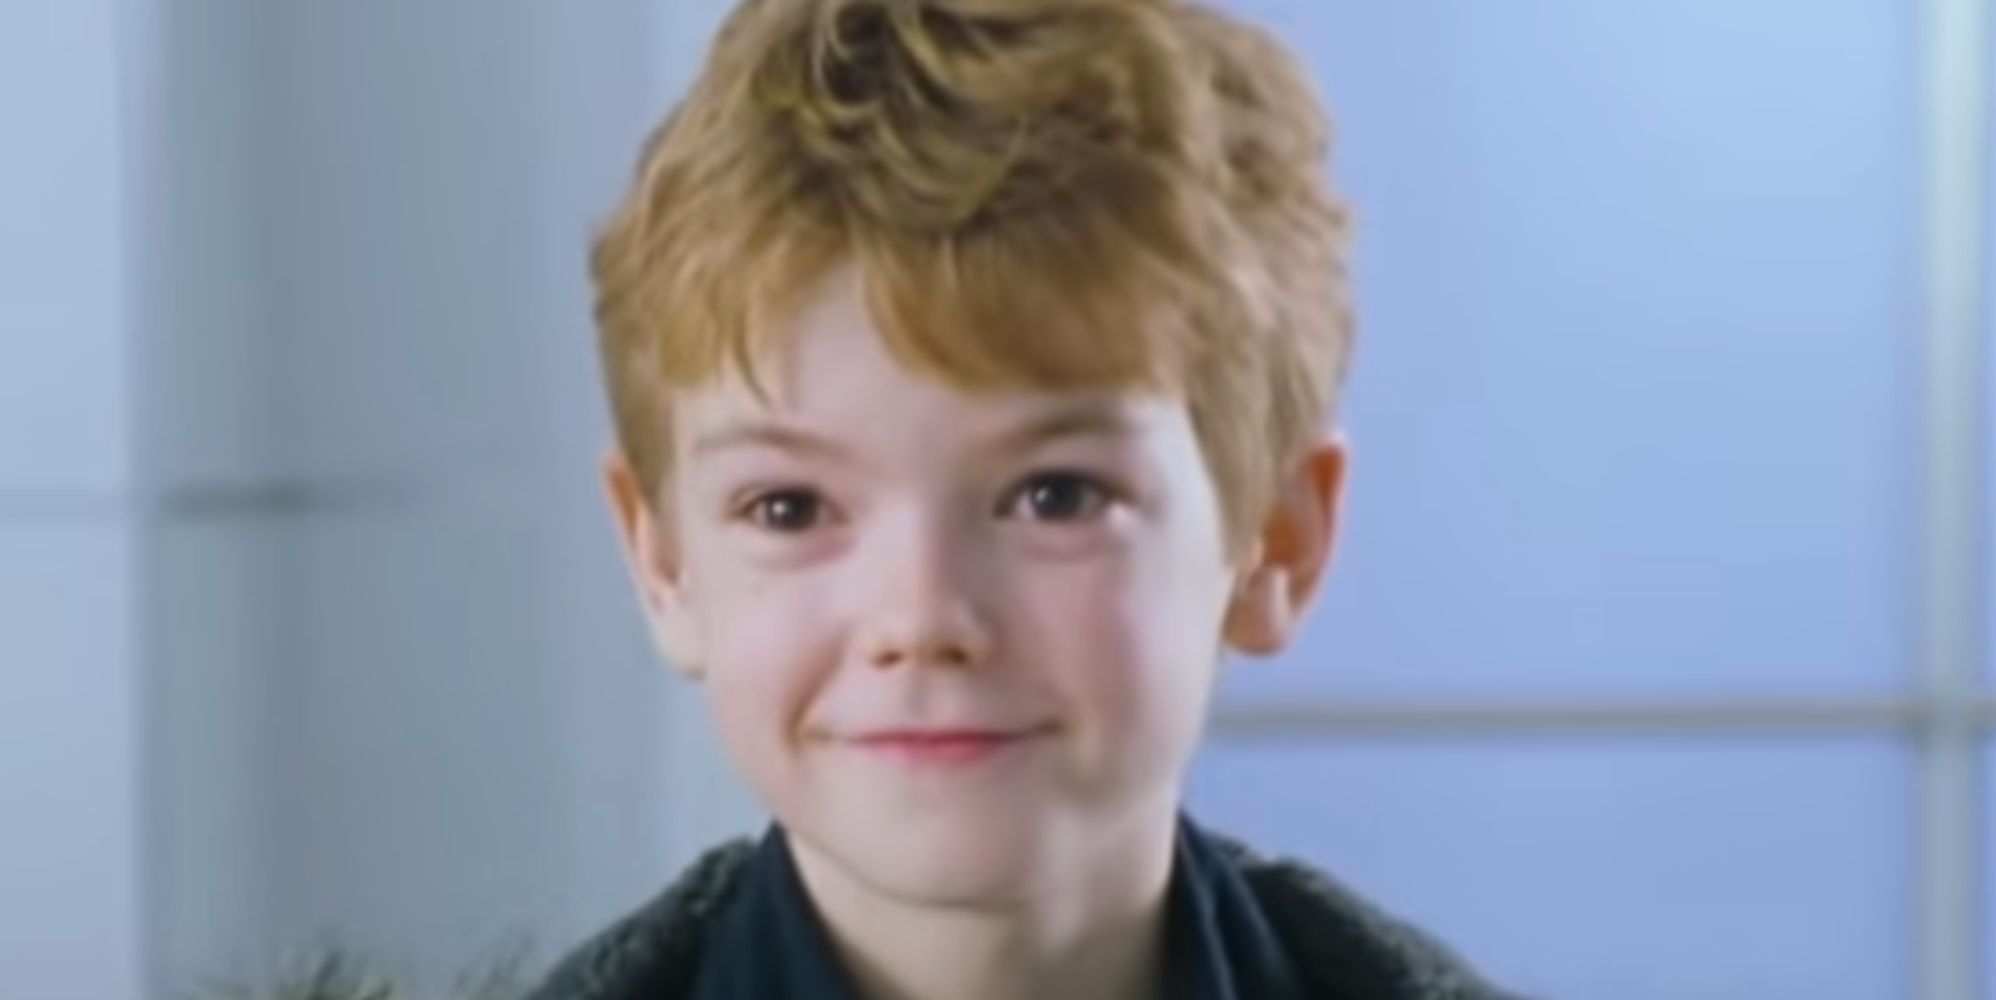 The Little Boy From 'Love Actually' Has Not Changed At All | The ...